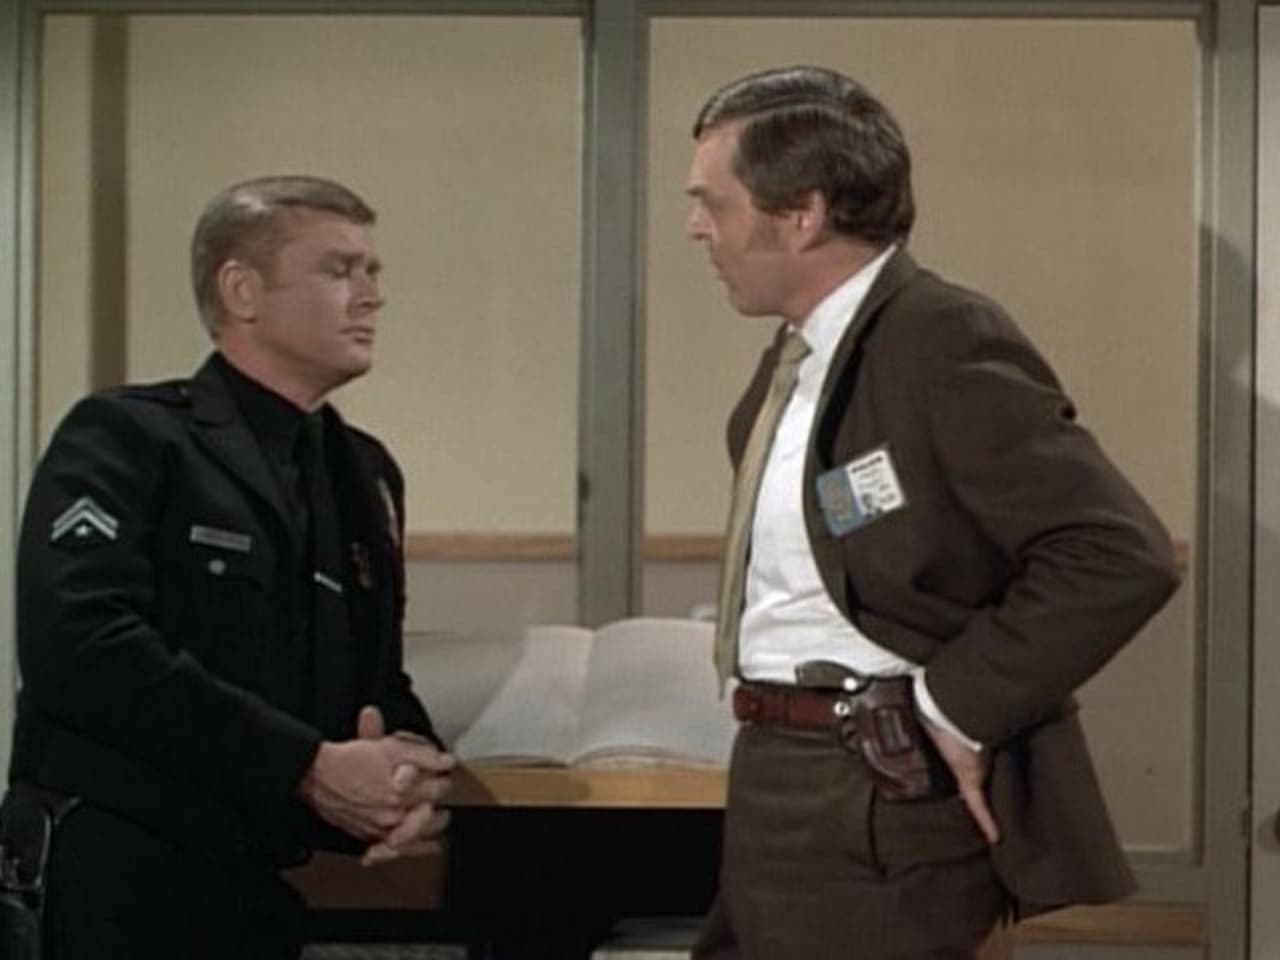 Adam-12 - Season 4 Episode 19 : Mary Hong Loves Tommy Chen